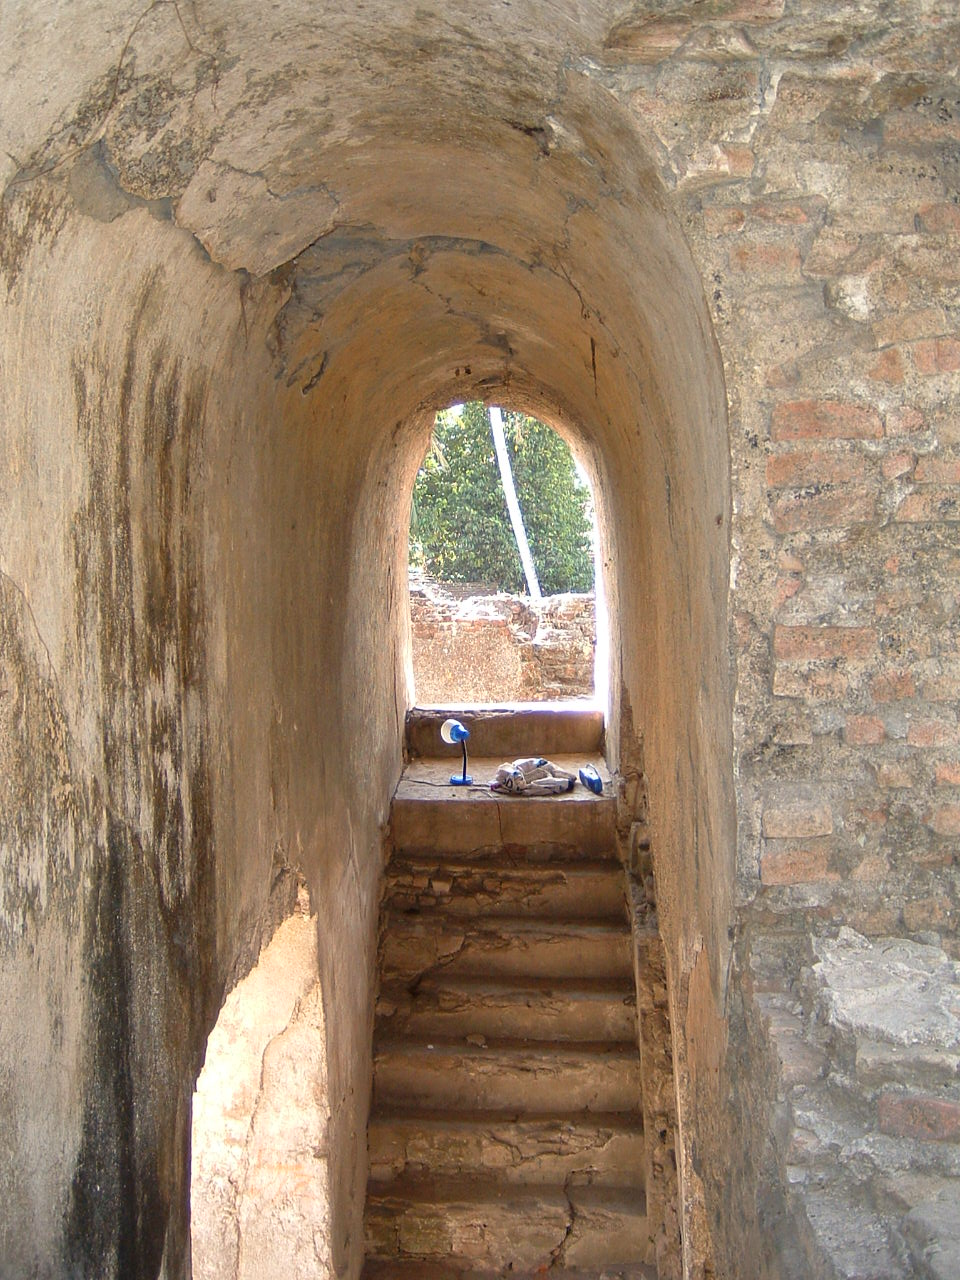 Interior view looking north at southern internal stairway that leads to second level